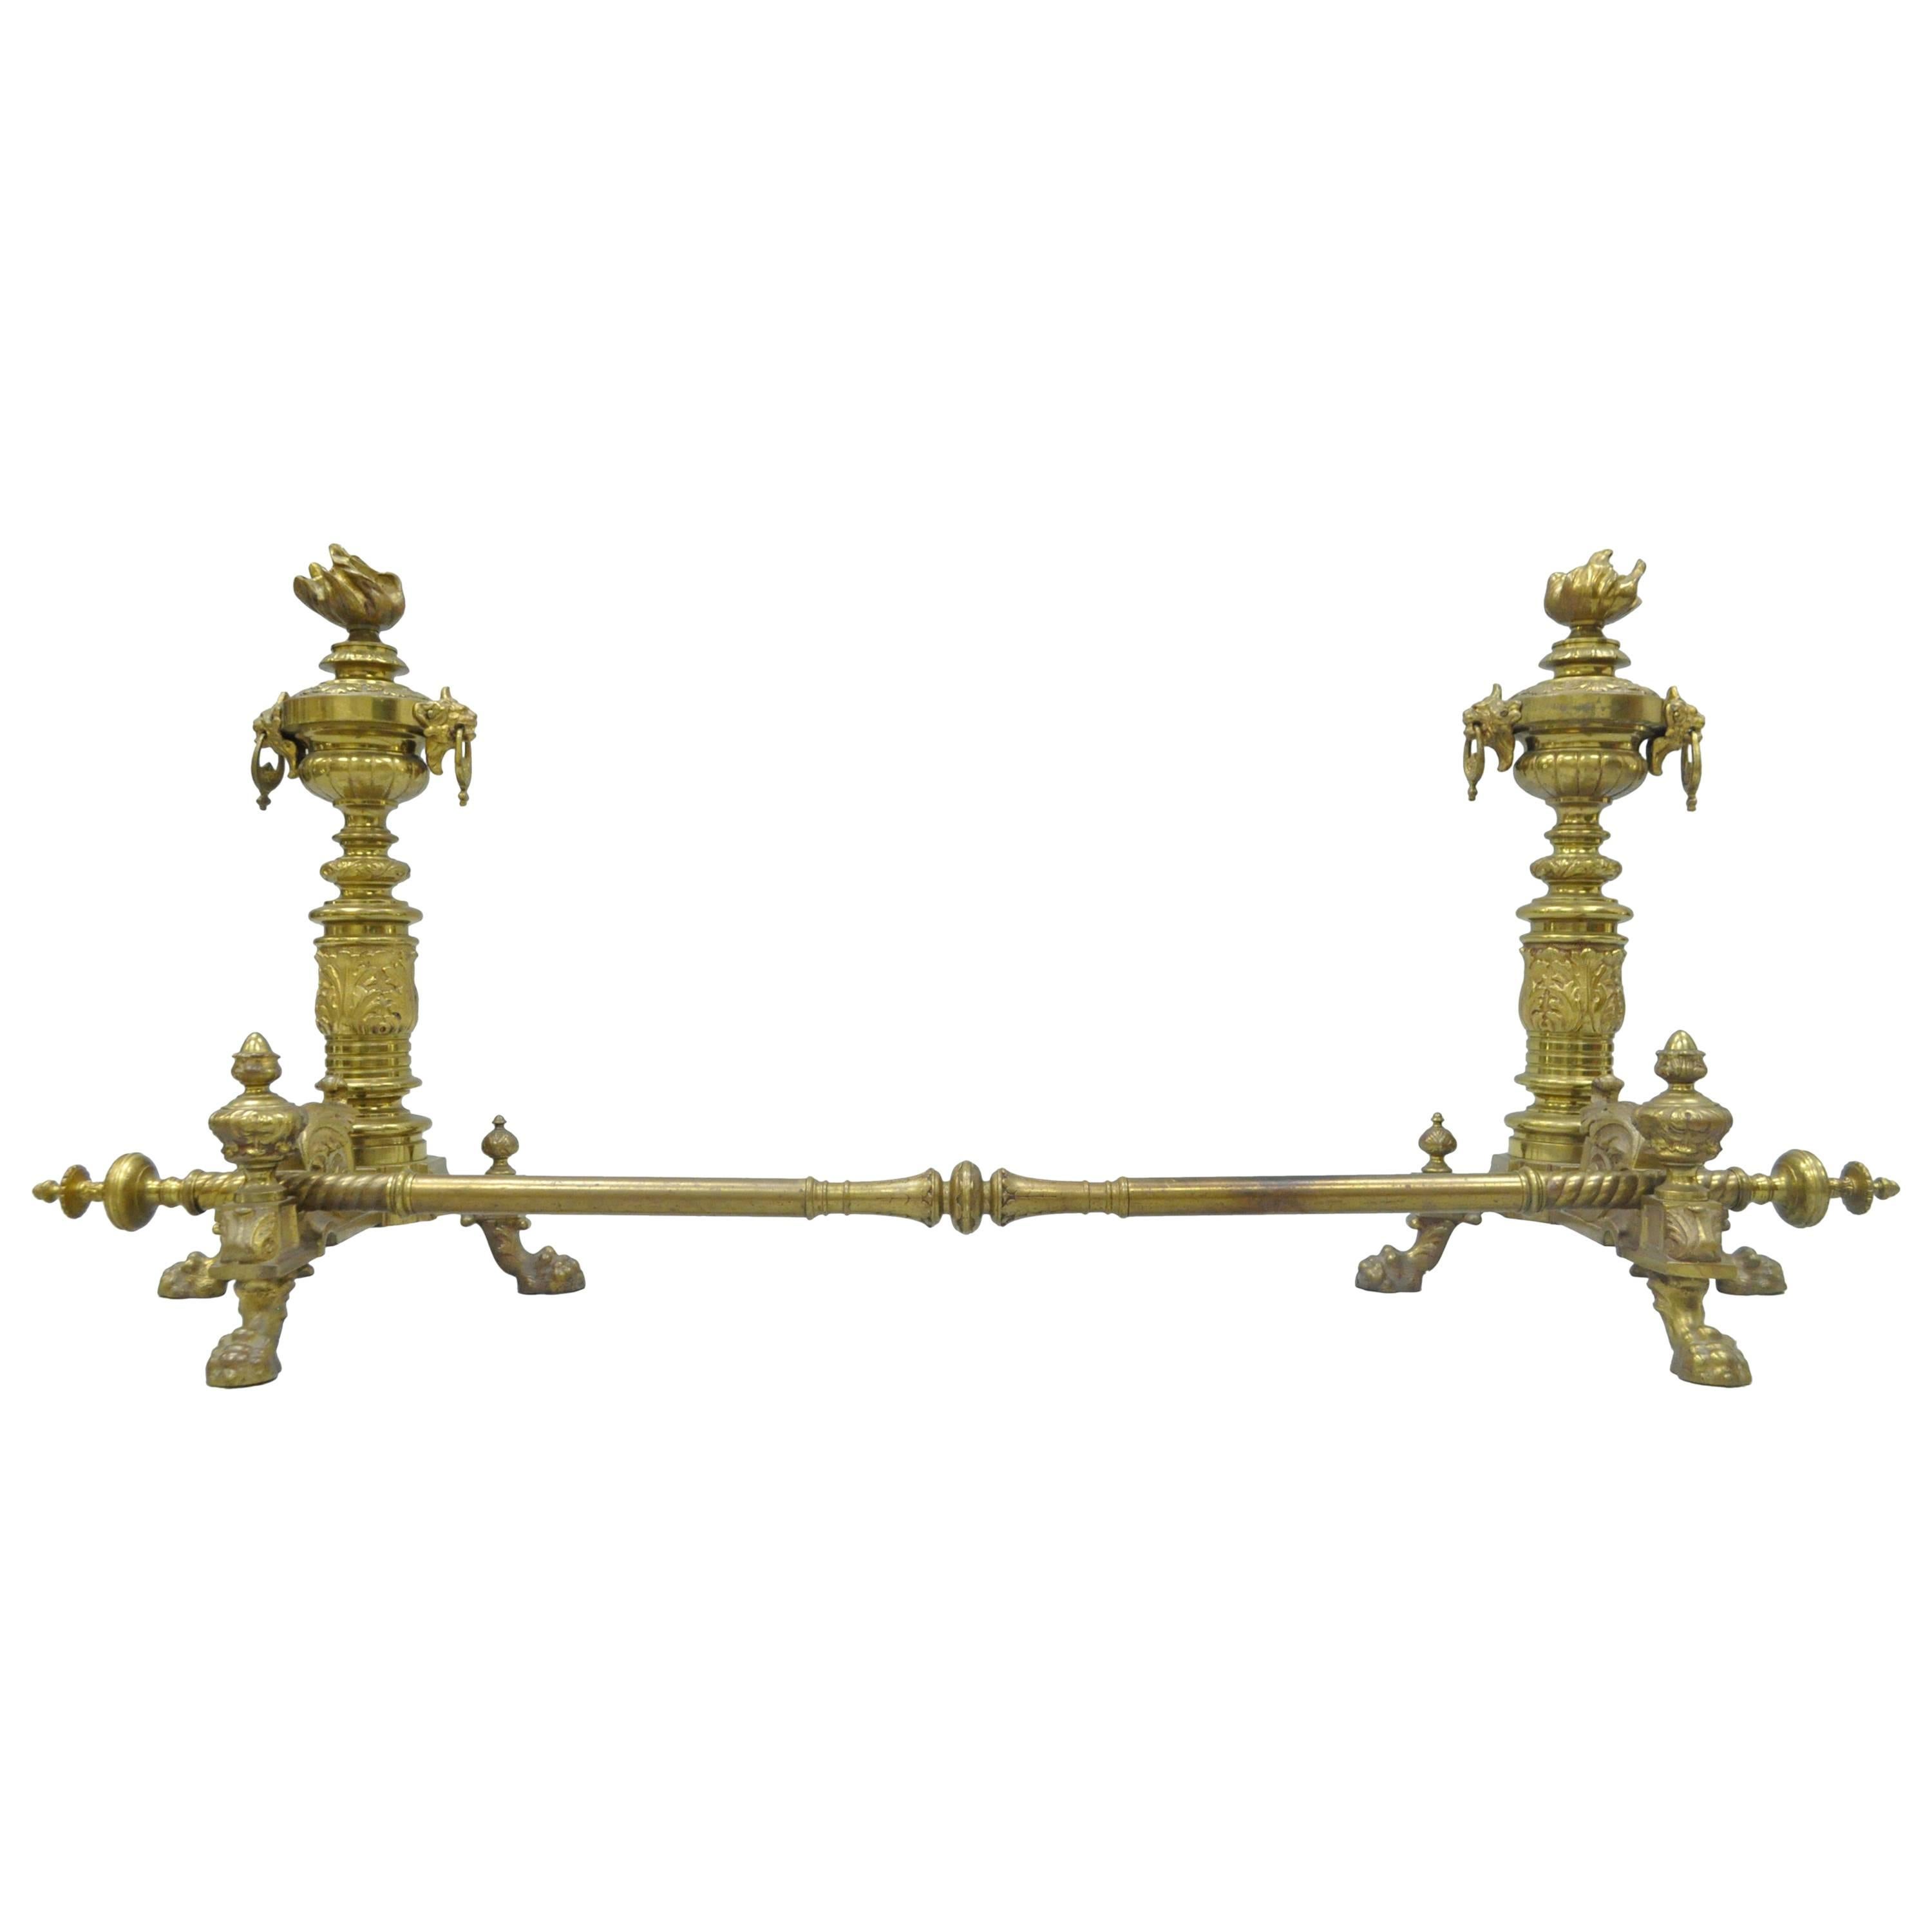 Pair of 19th C. French Empire Neoclassical Flame & Lion Brass Paw Andirons & Bar